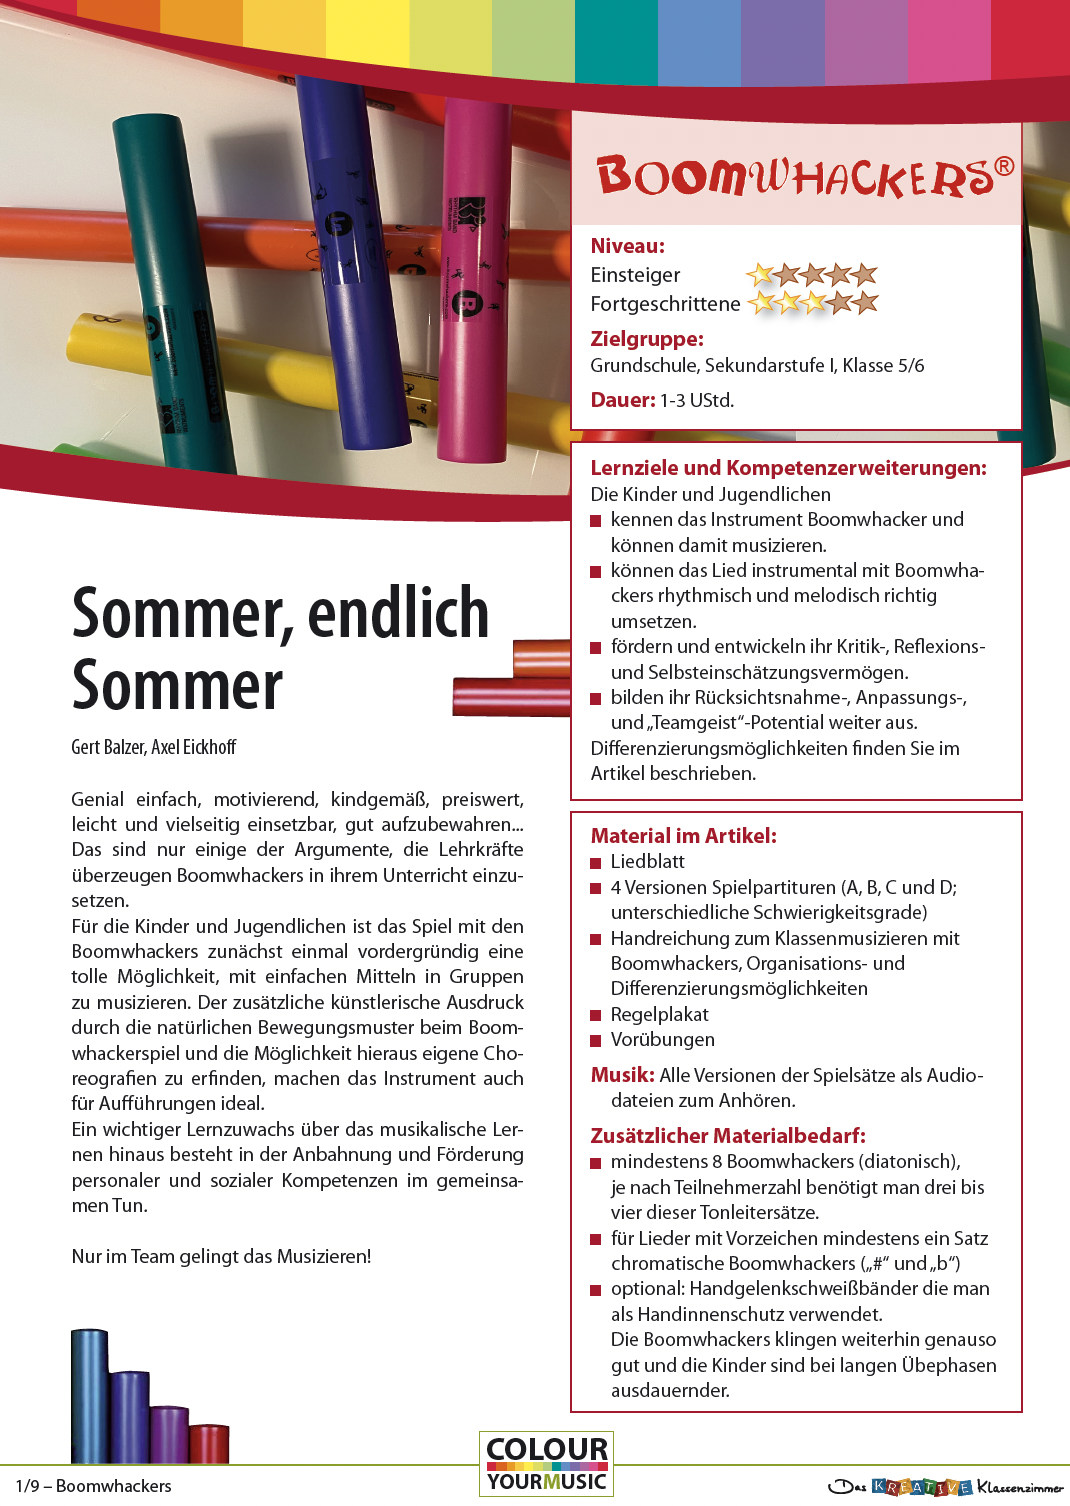 Sommer, endlich Sommer - Boomwhackers